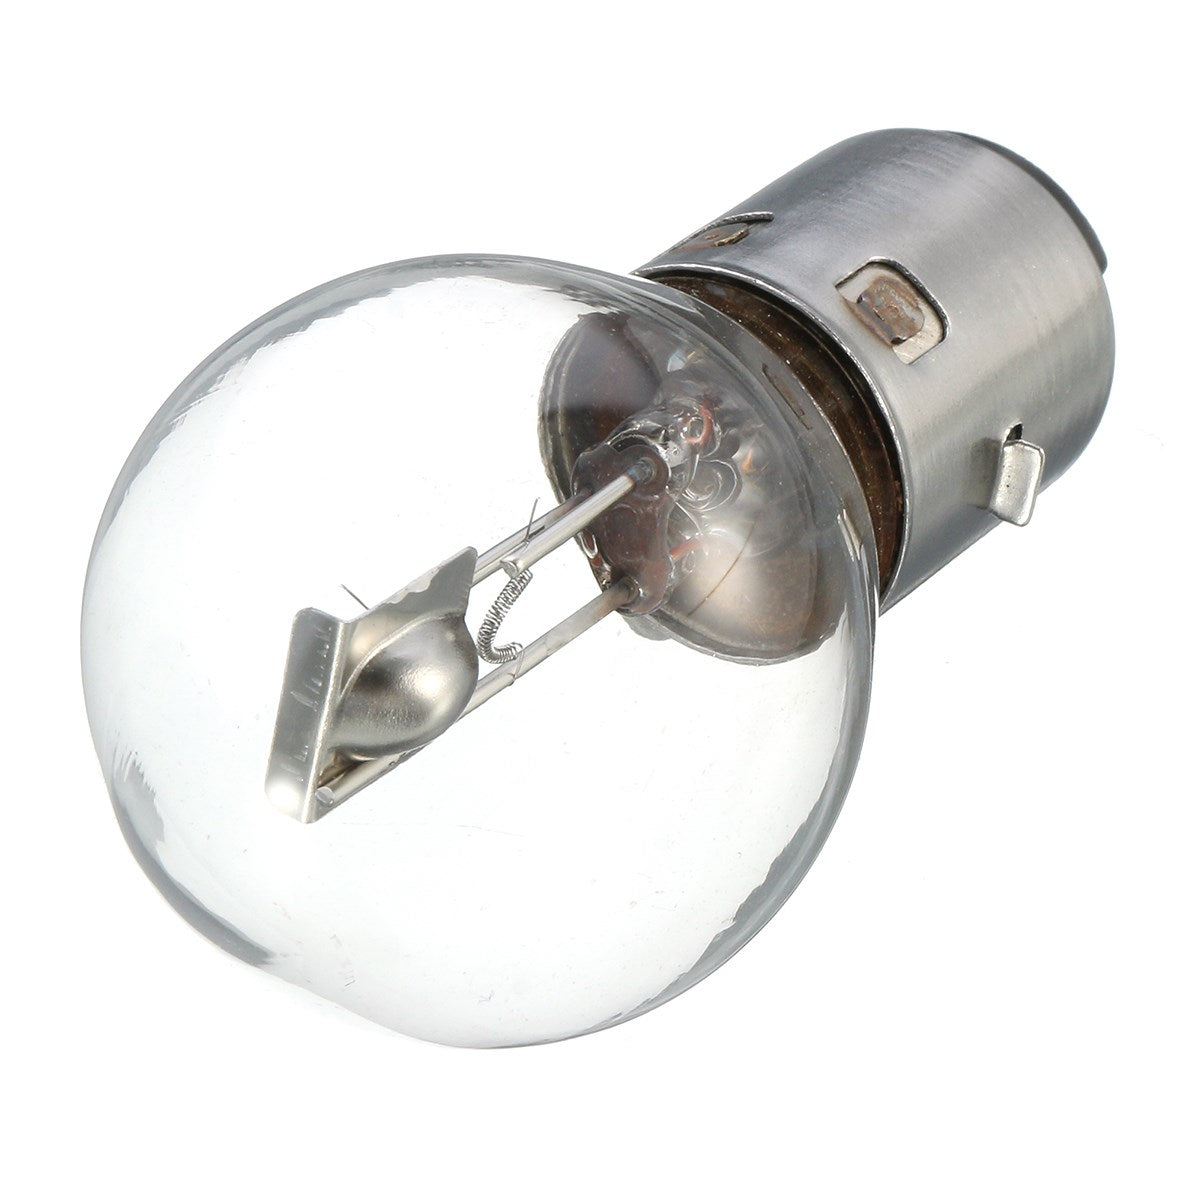 Dim Gray Motorcycle scooter headlight bulb (Transparent)